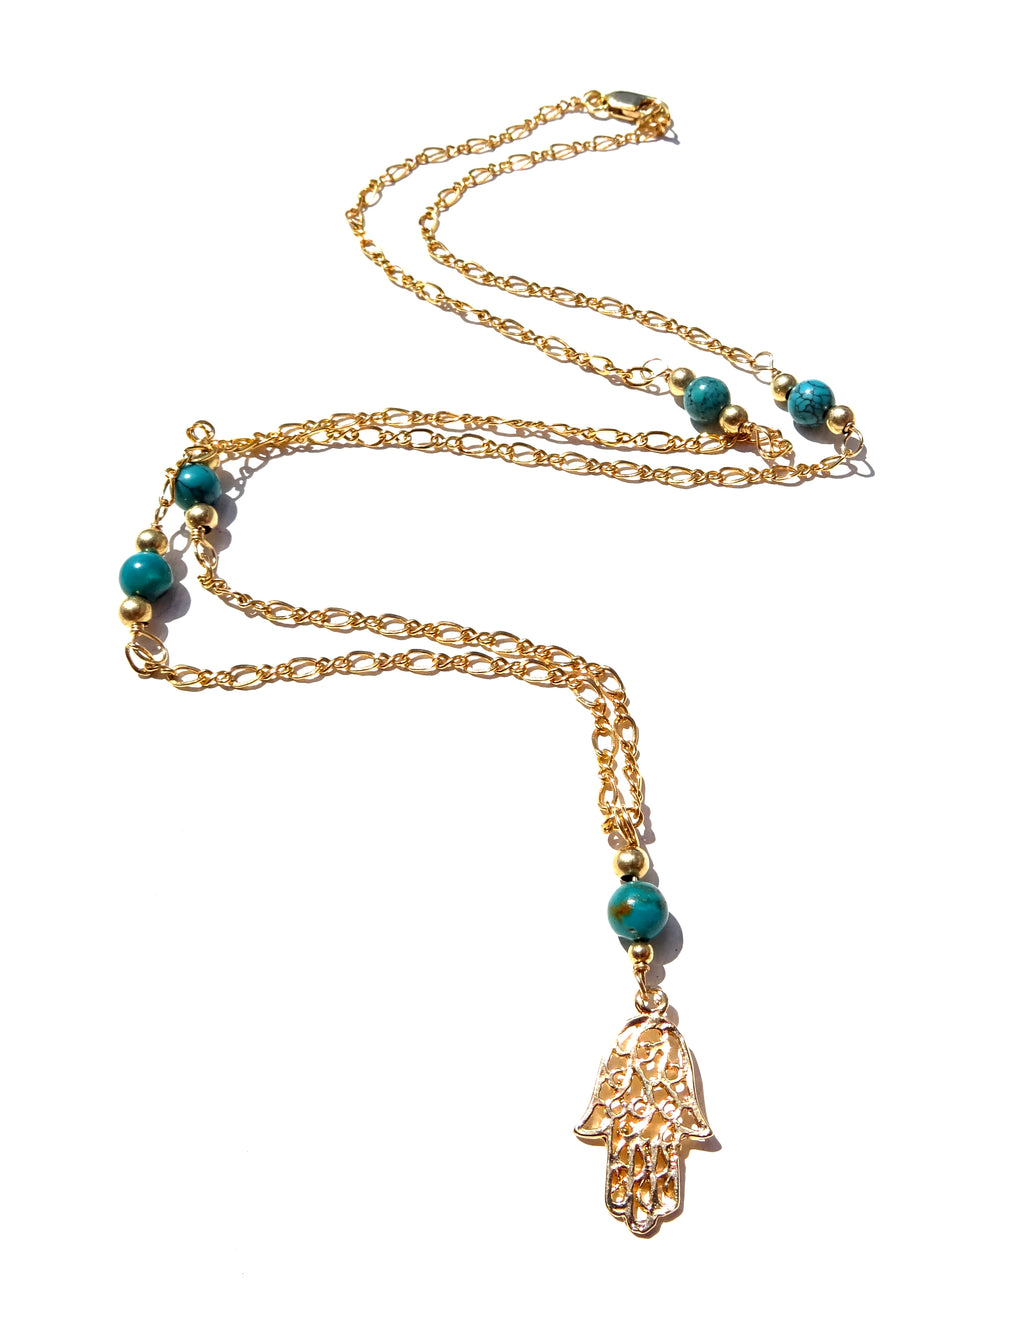 Gold filled necklace with gemstones Turquoise beads with Hamsa symbol pendant